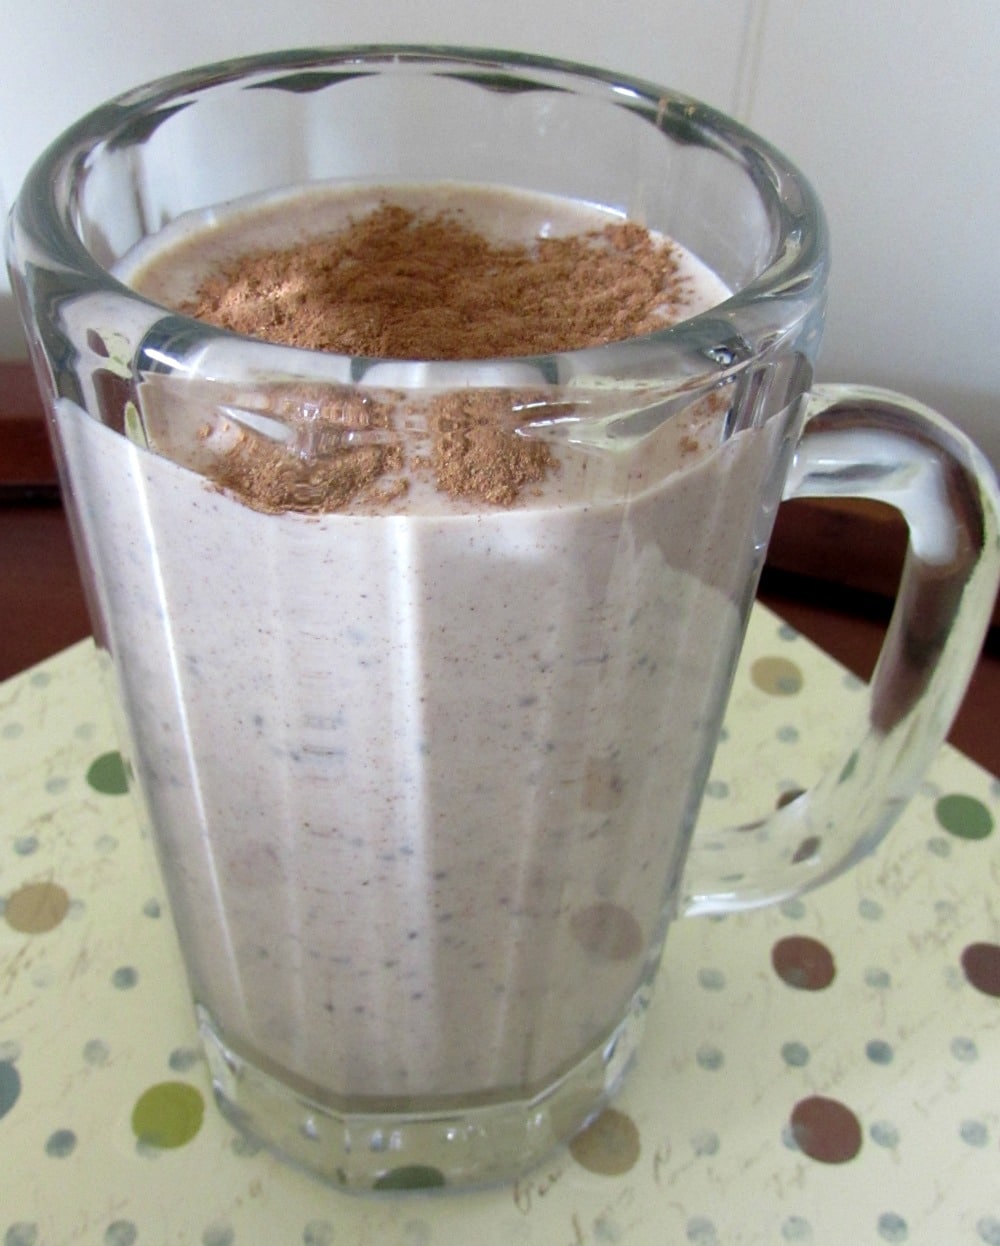 Baby Boomer Recipes | Smoothie | Peruvian Smoothie with Maca Root and Chia